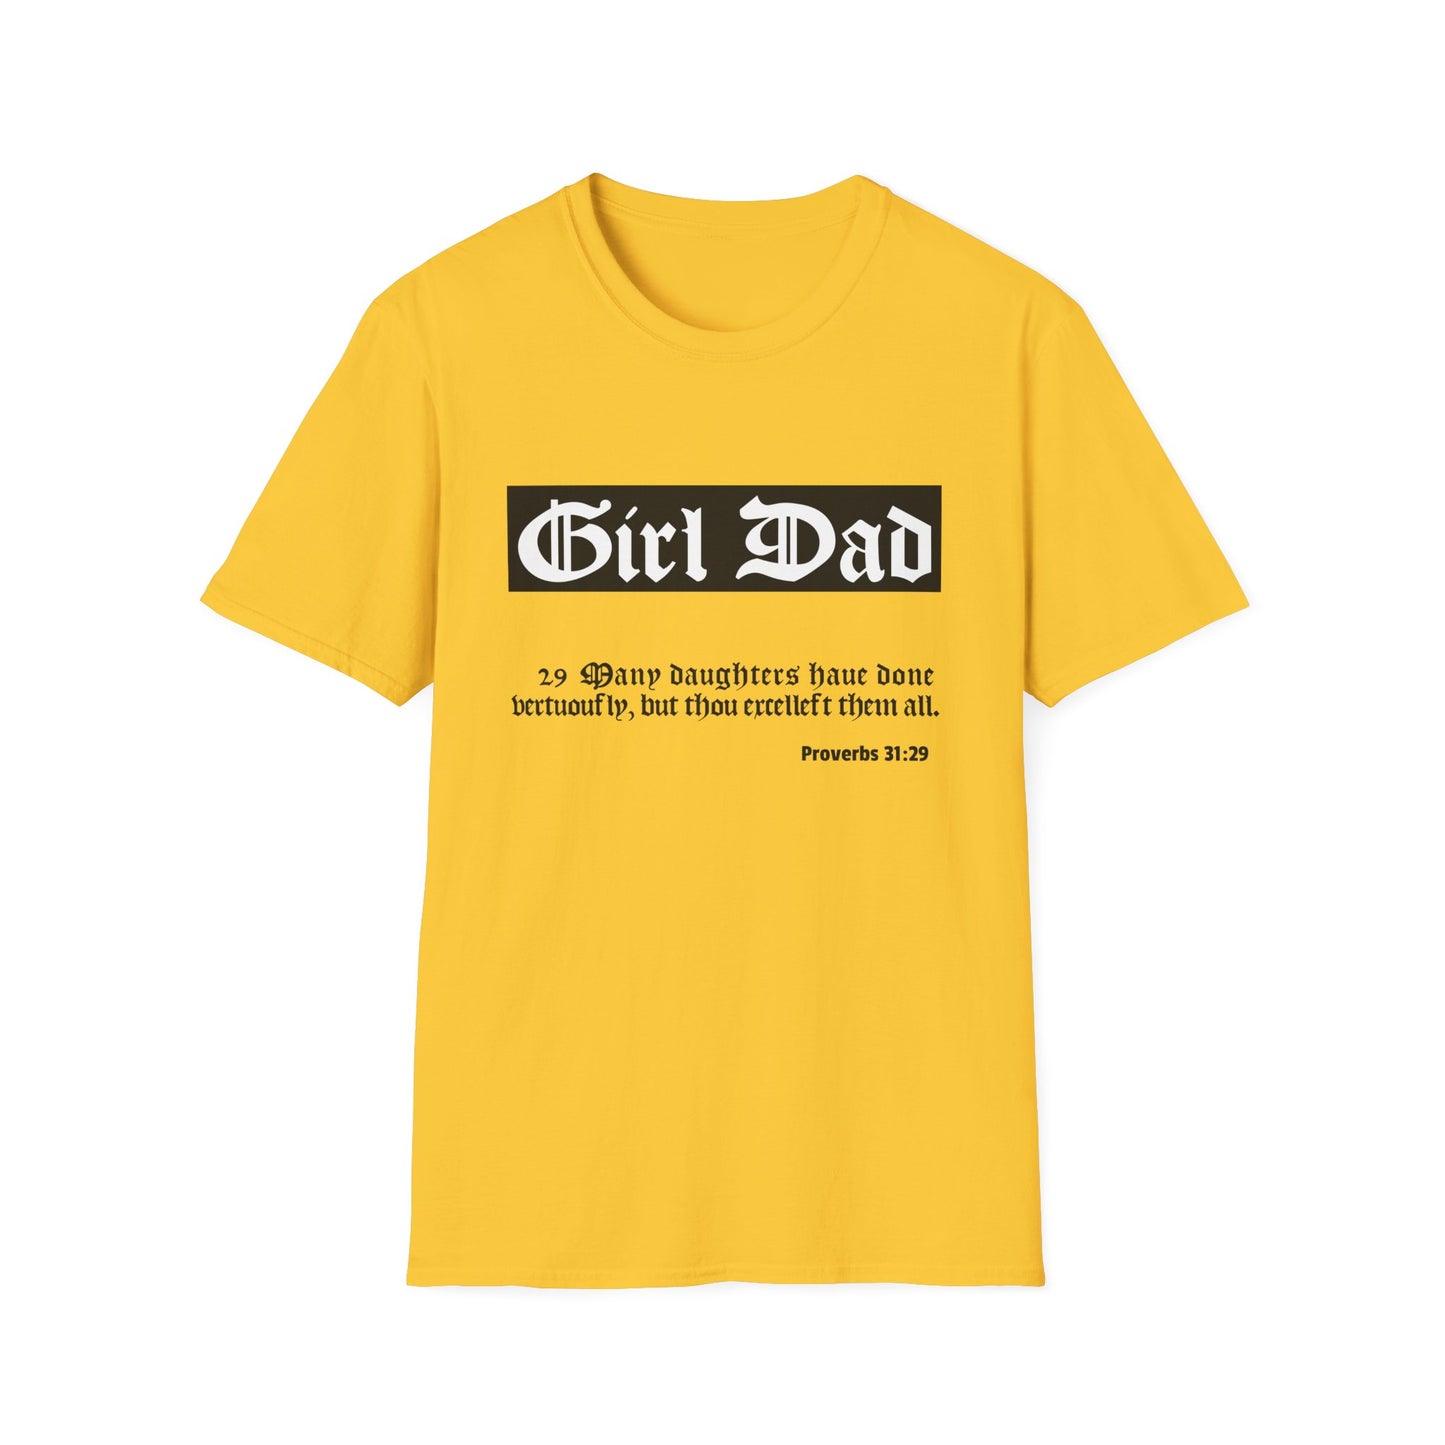 "Girl Dad" Softstyle T-Shirt with 1611 KJV Bible Verse Proverbs 31:29